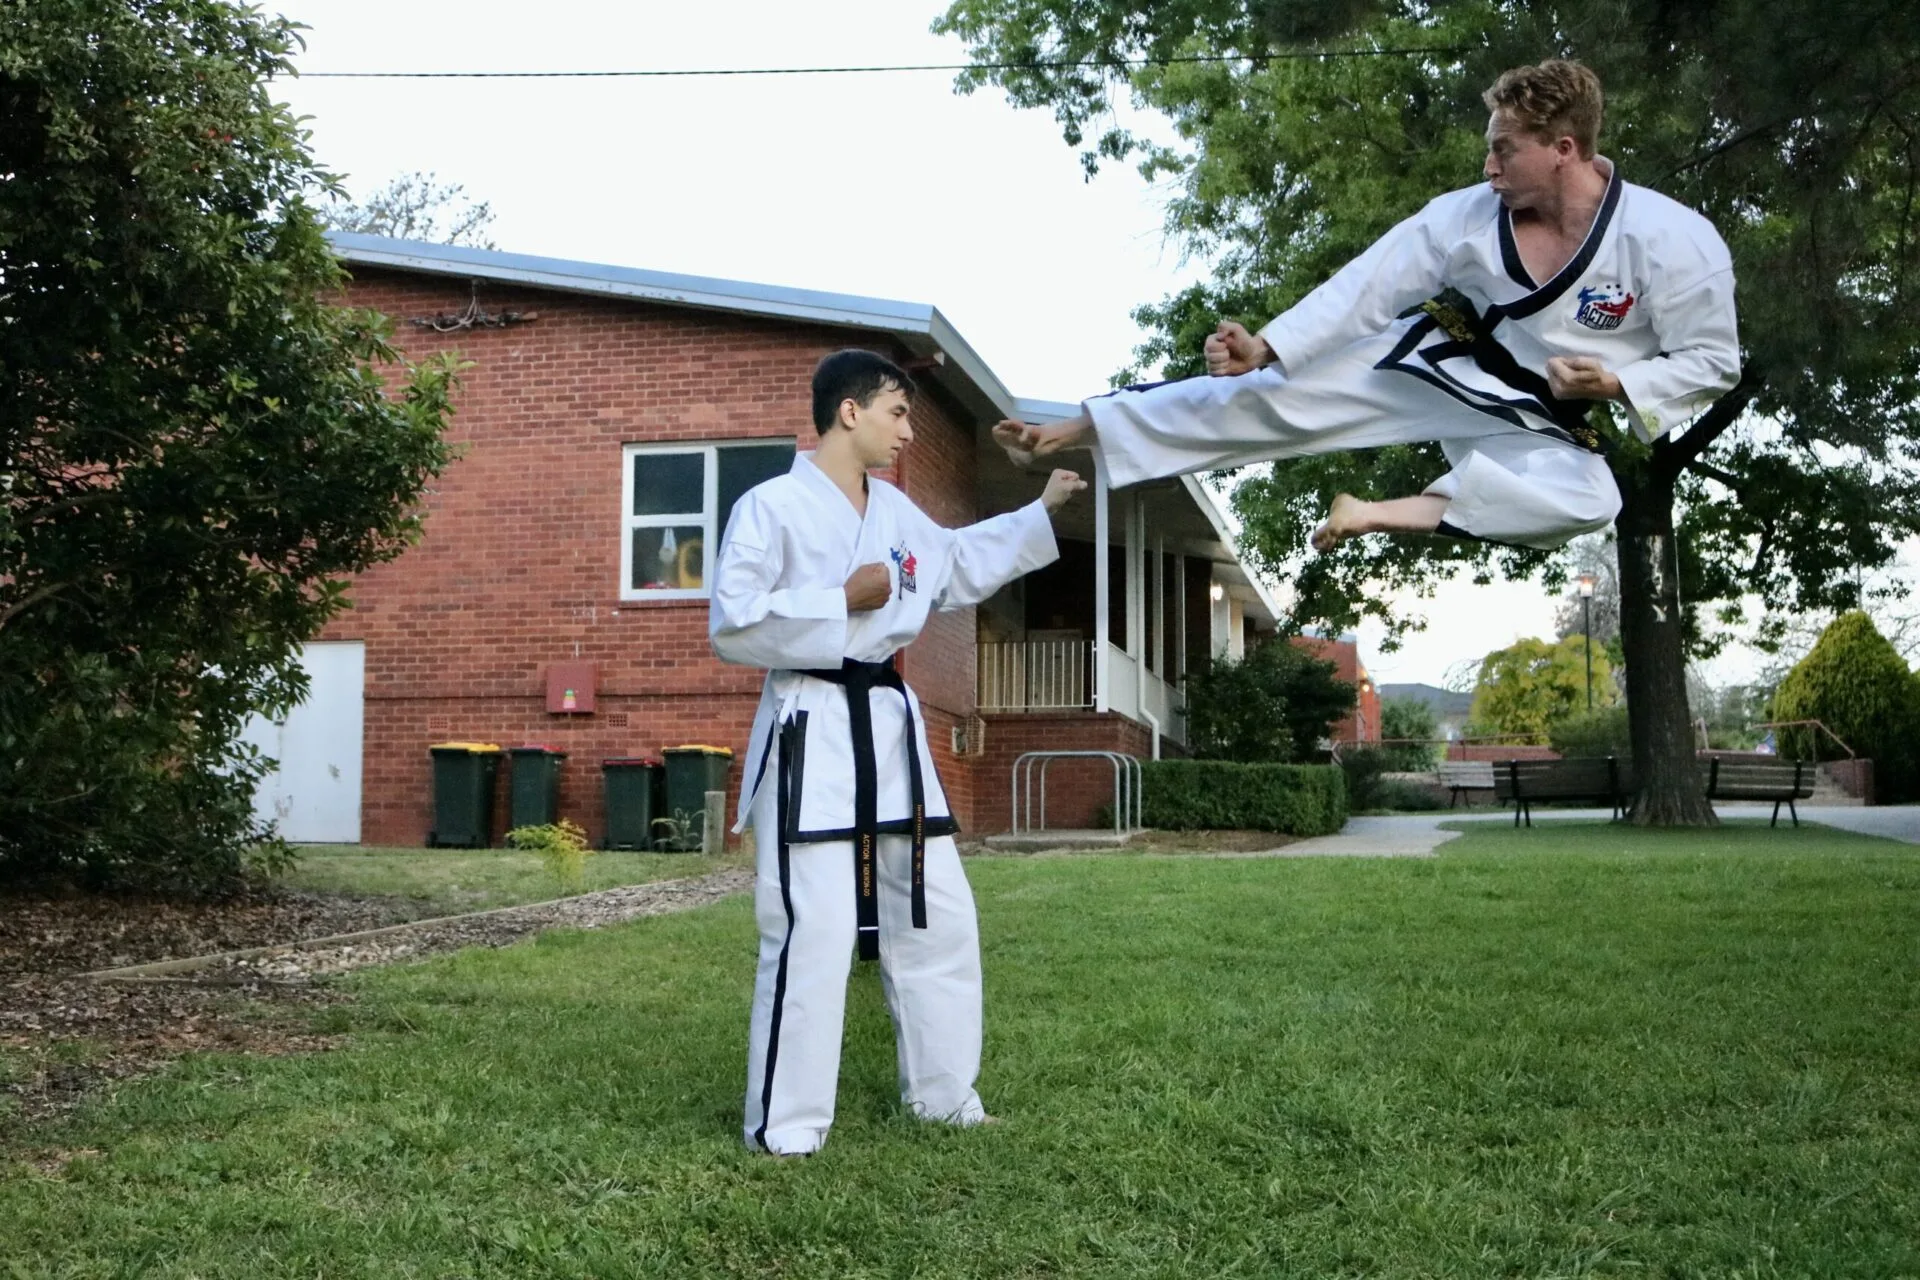 Chief Instructor Alex Benson flying side kick outside with Instructor Alfred Ding.